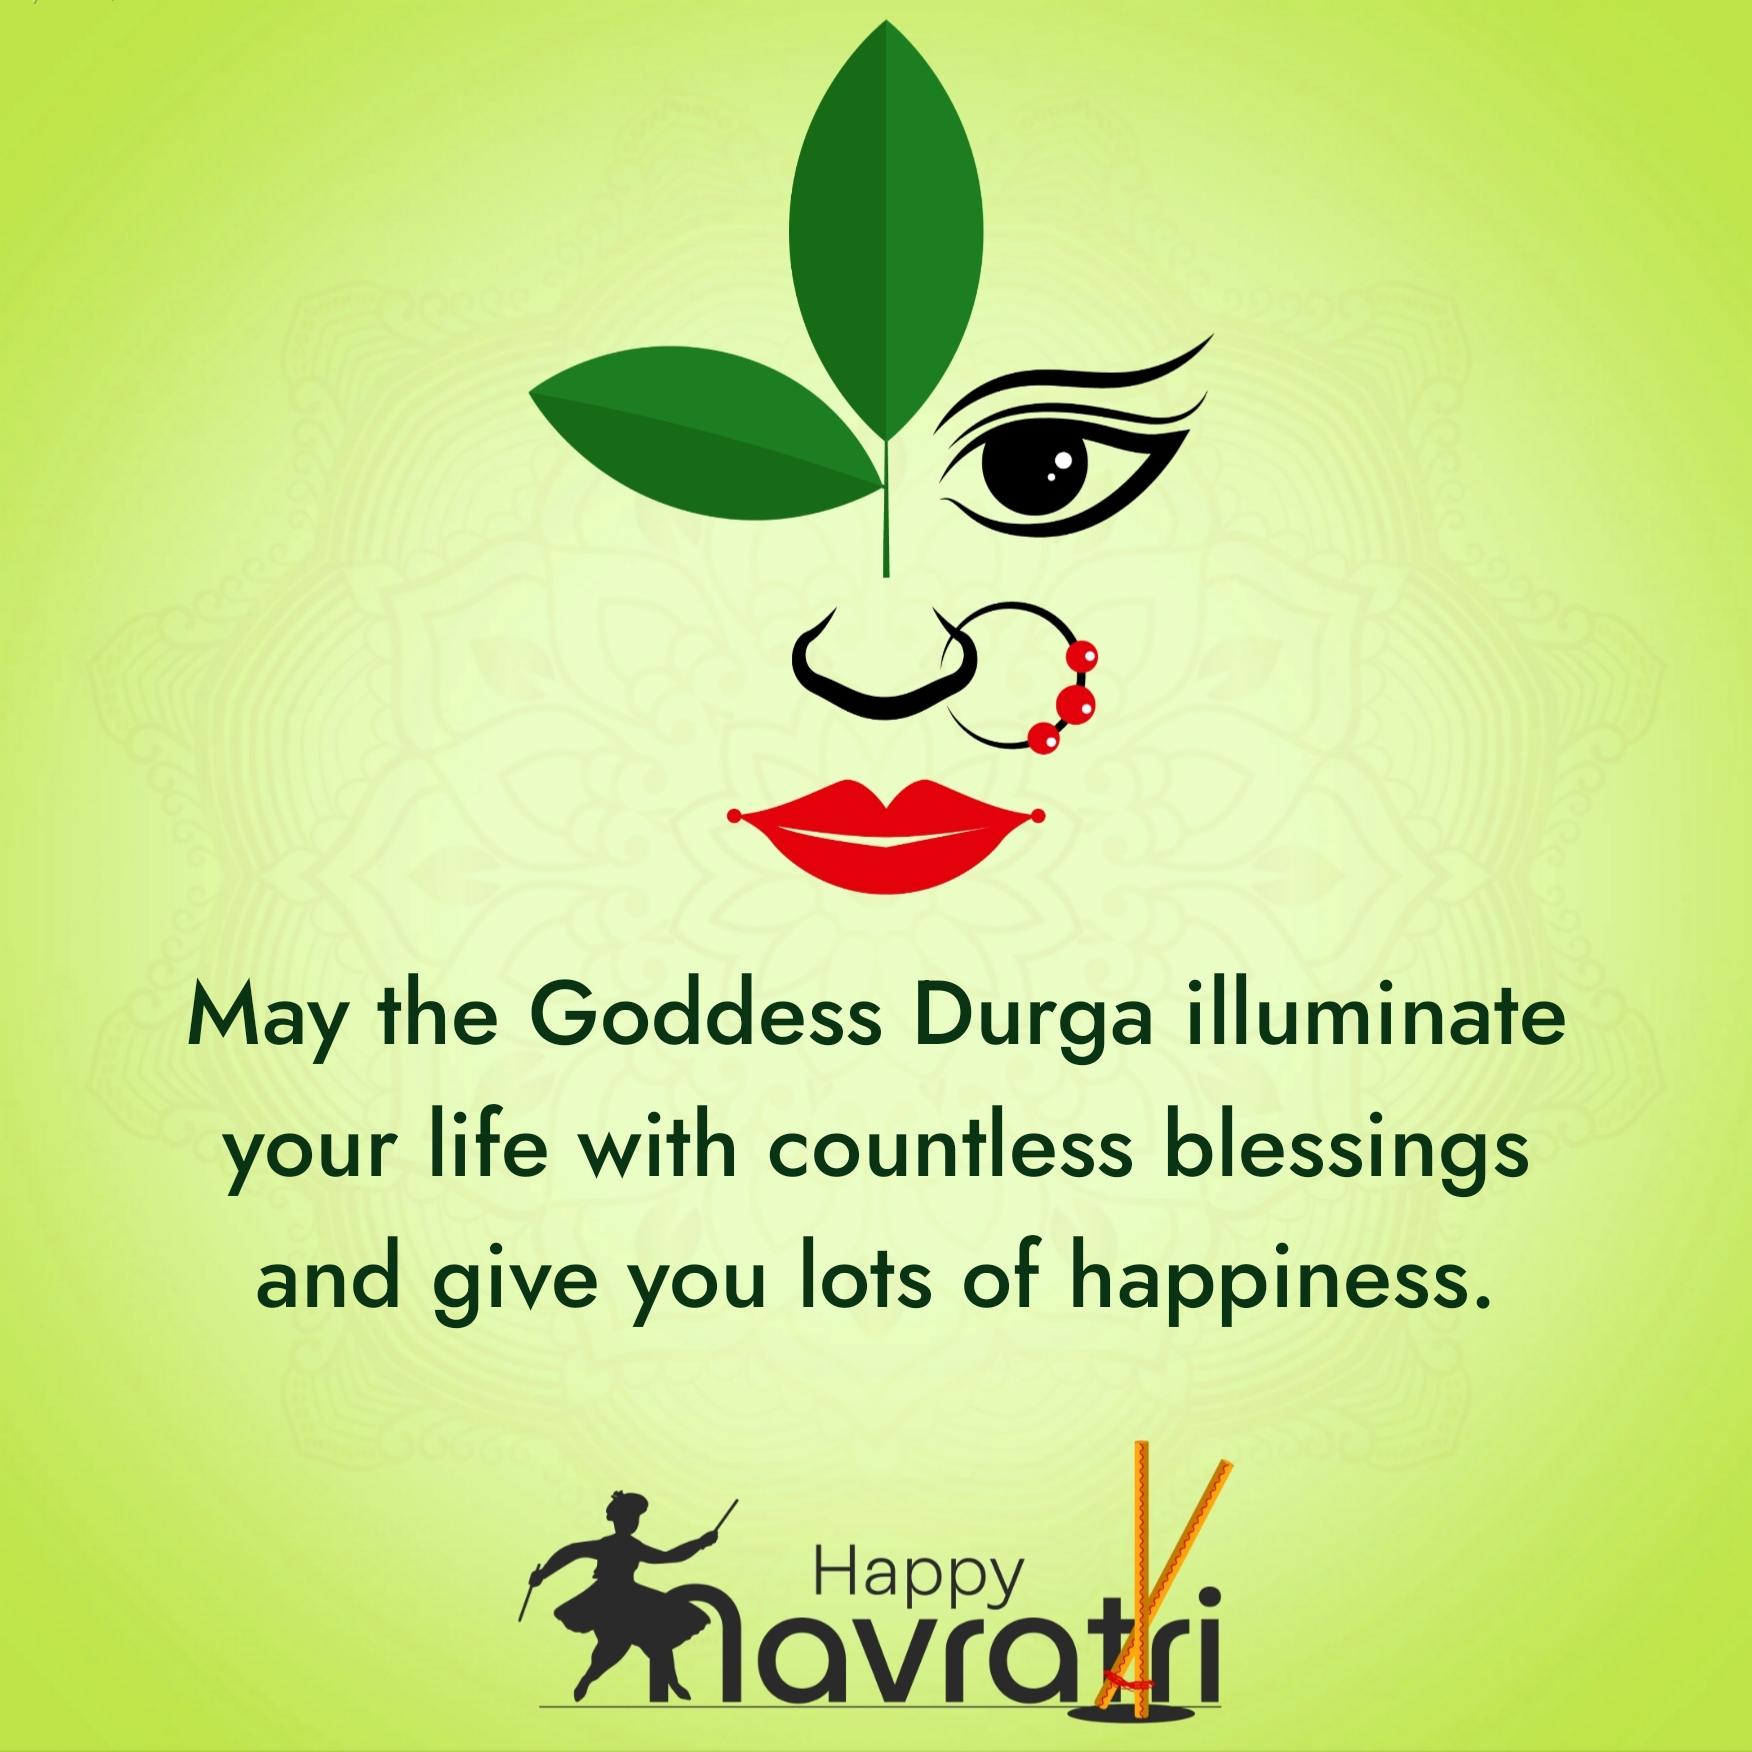 May the Goddess Durga illuminate your life with countless blessings